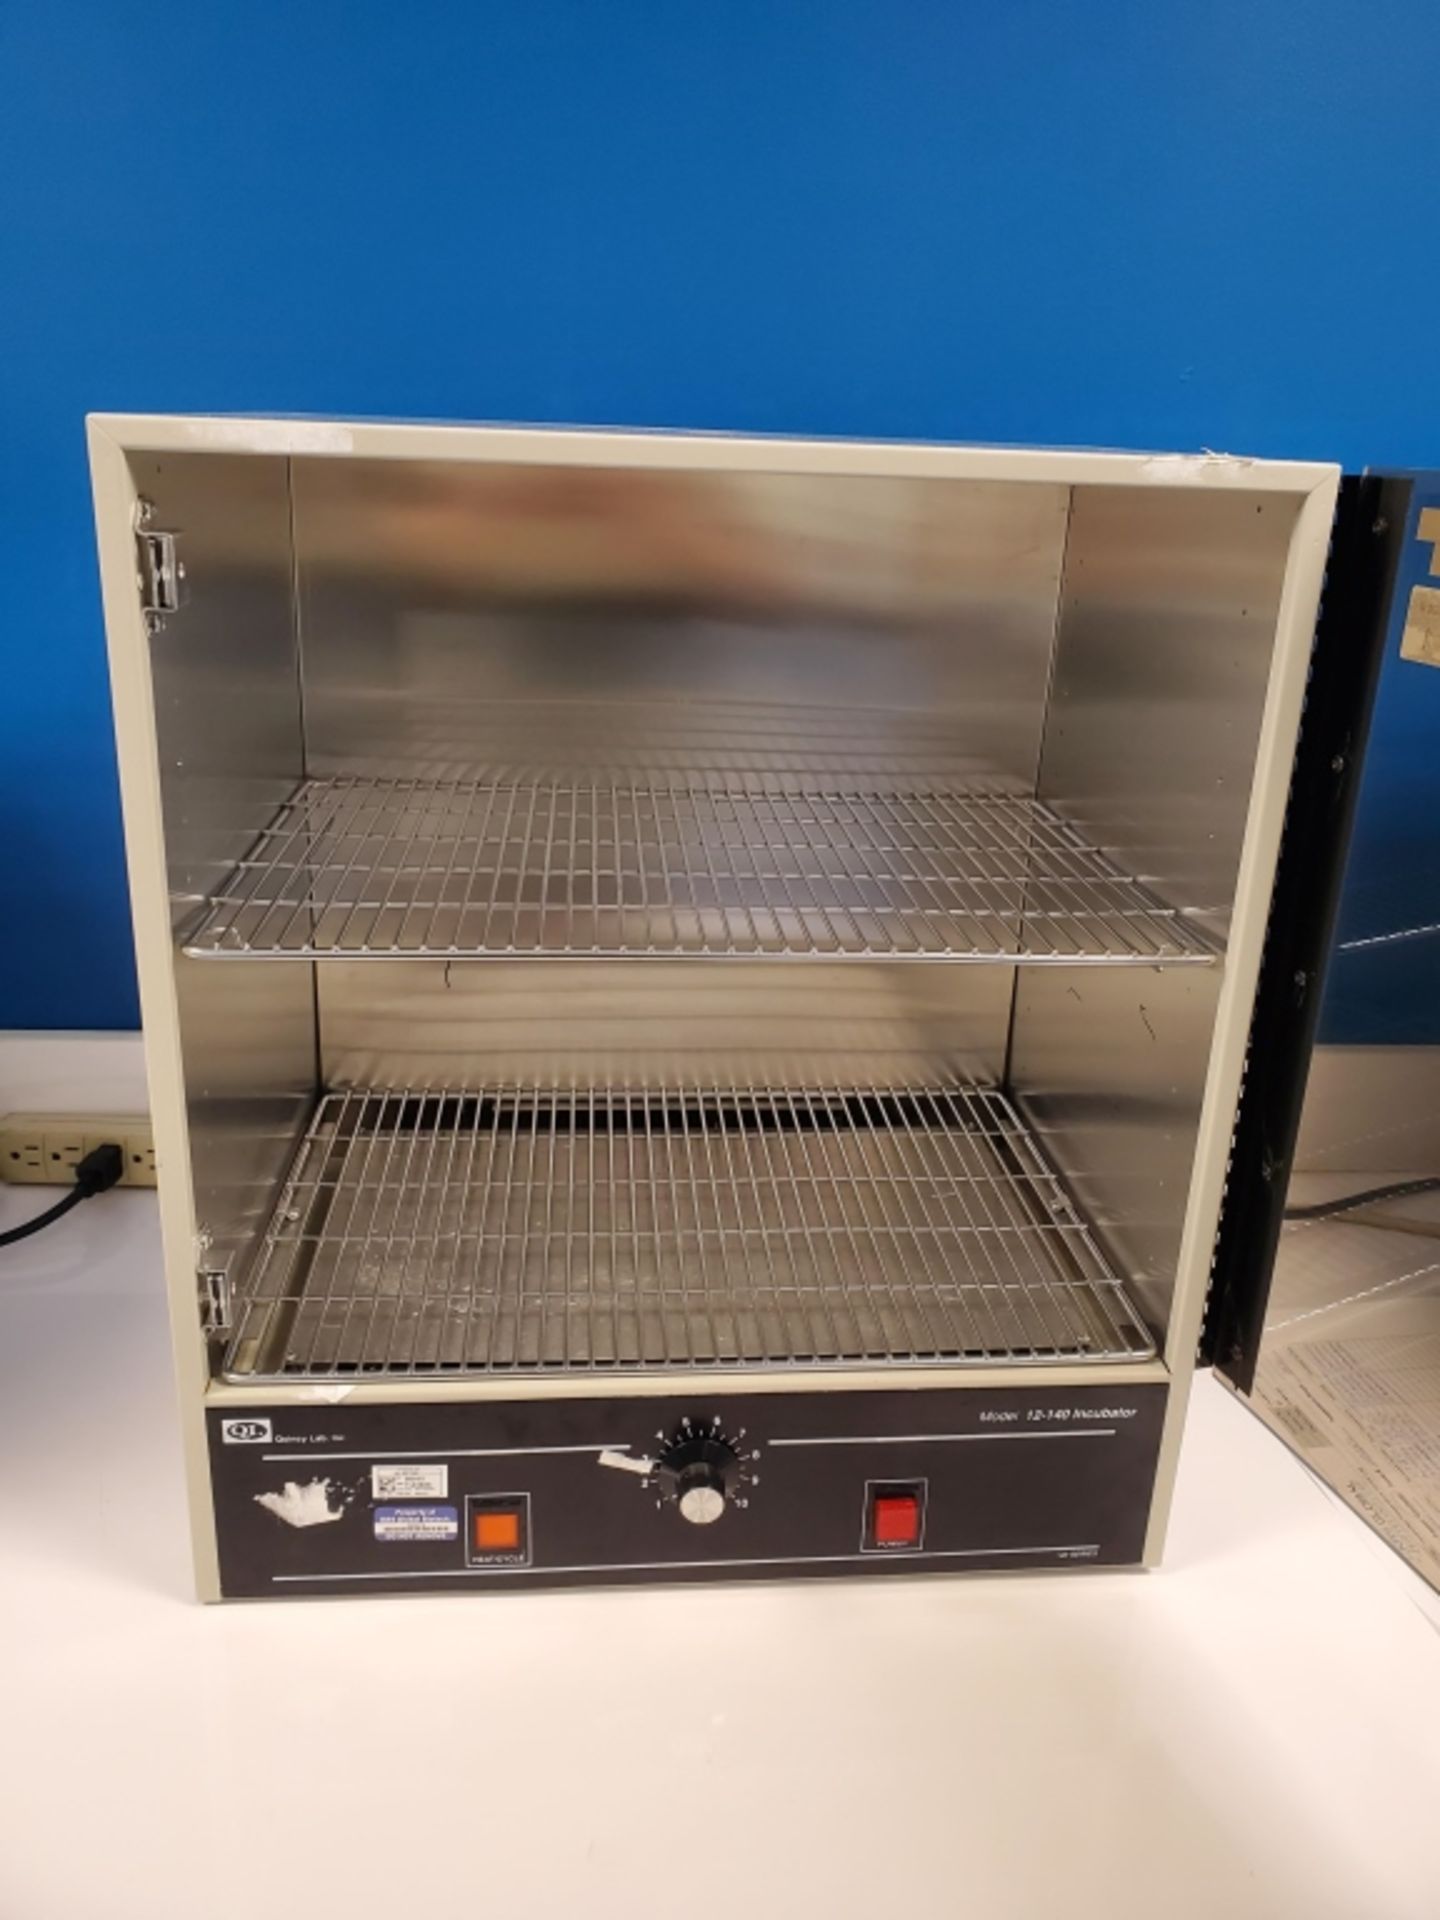 Quincy Lab Model 12-140 Incubator, sn T-03886 - Image 2 of 4